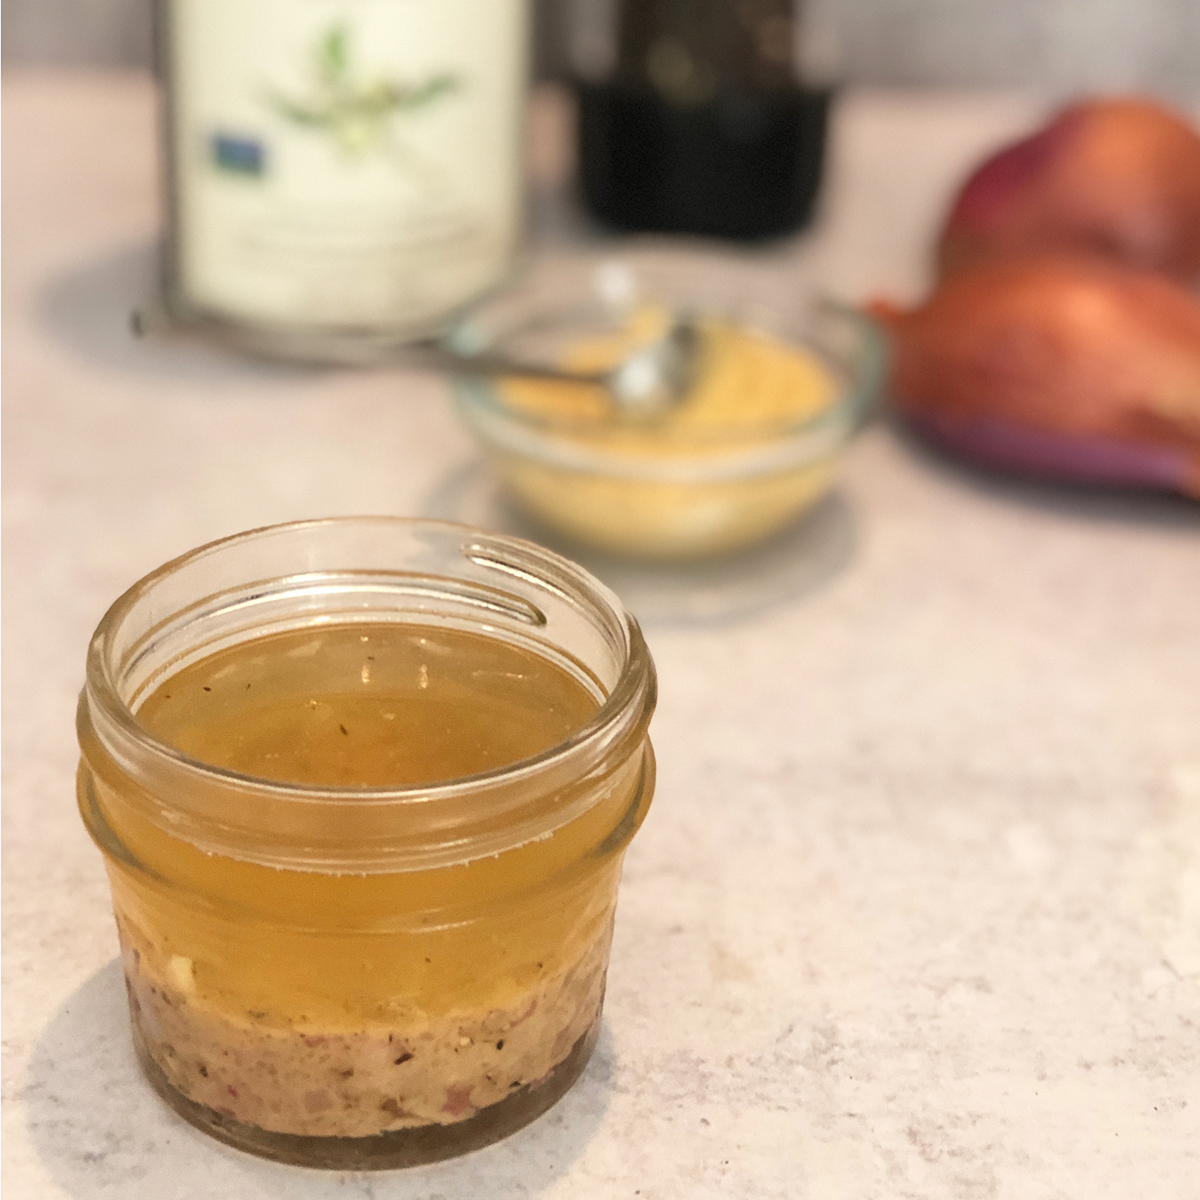 Shallot and Walnut Oil Vinaigrette with ingredients in background